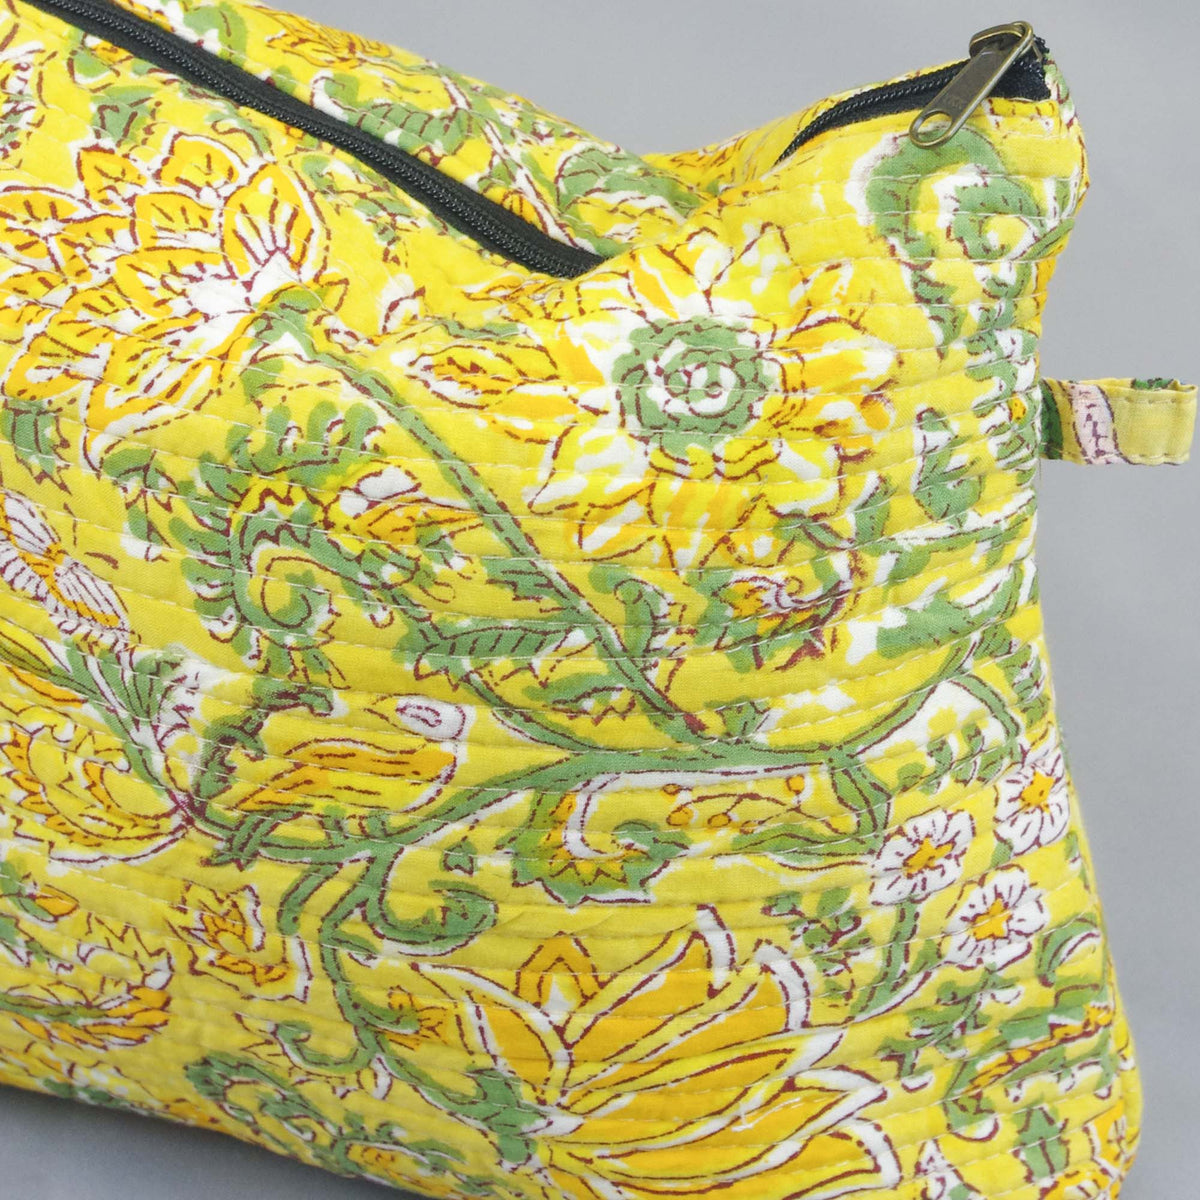 Square Shape Quilted Toiletry Bag - Classic Yellow Floral